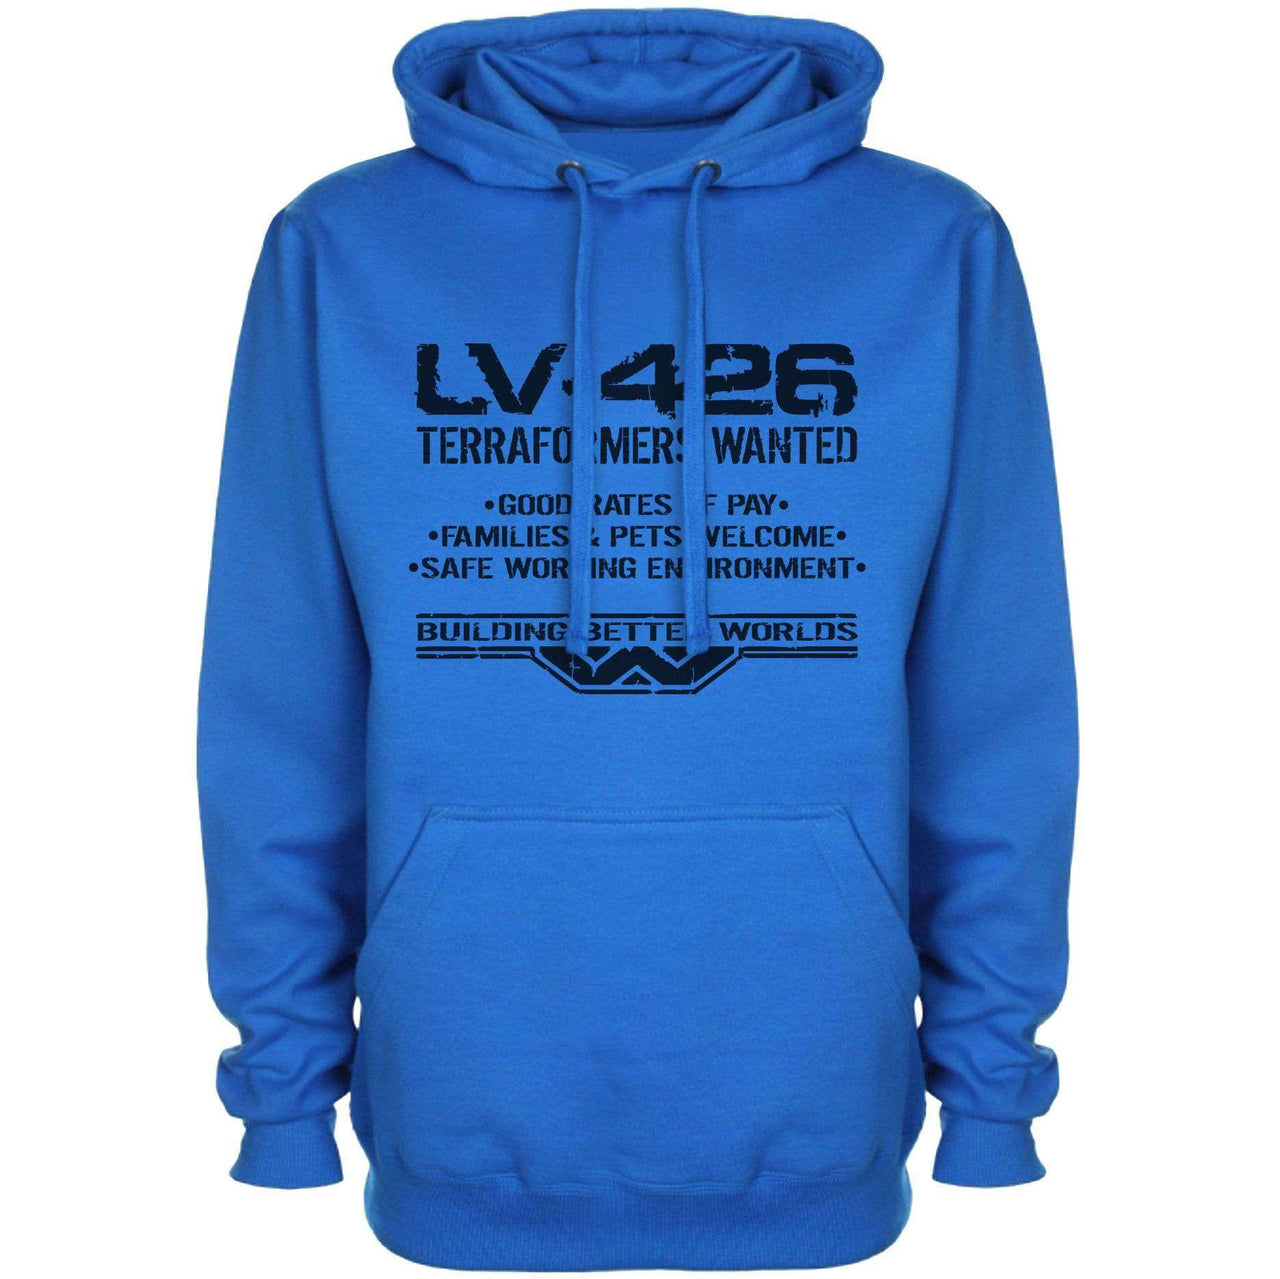 LV-426 Terraformers Wanted Graphic Hoodie 8Ball